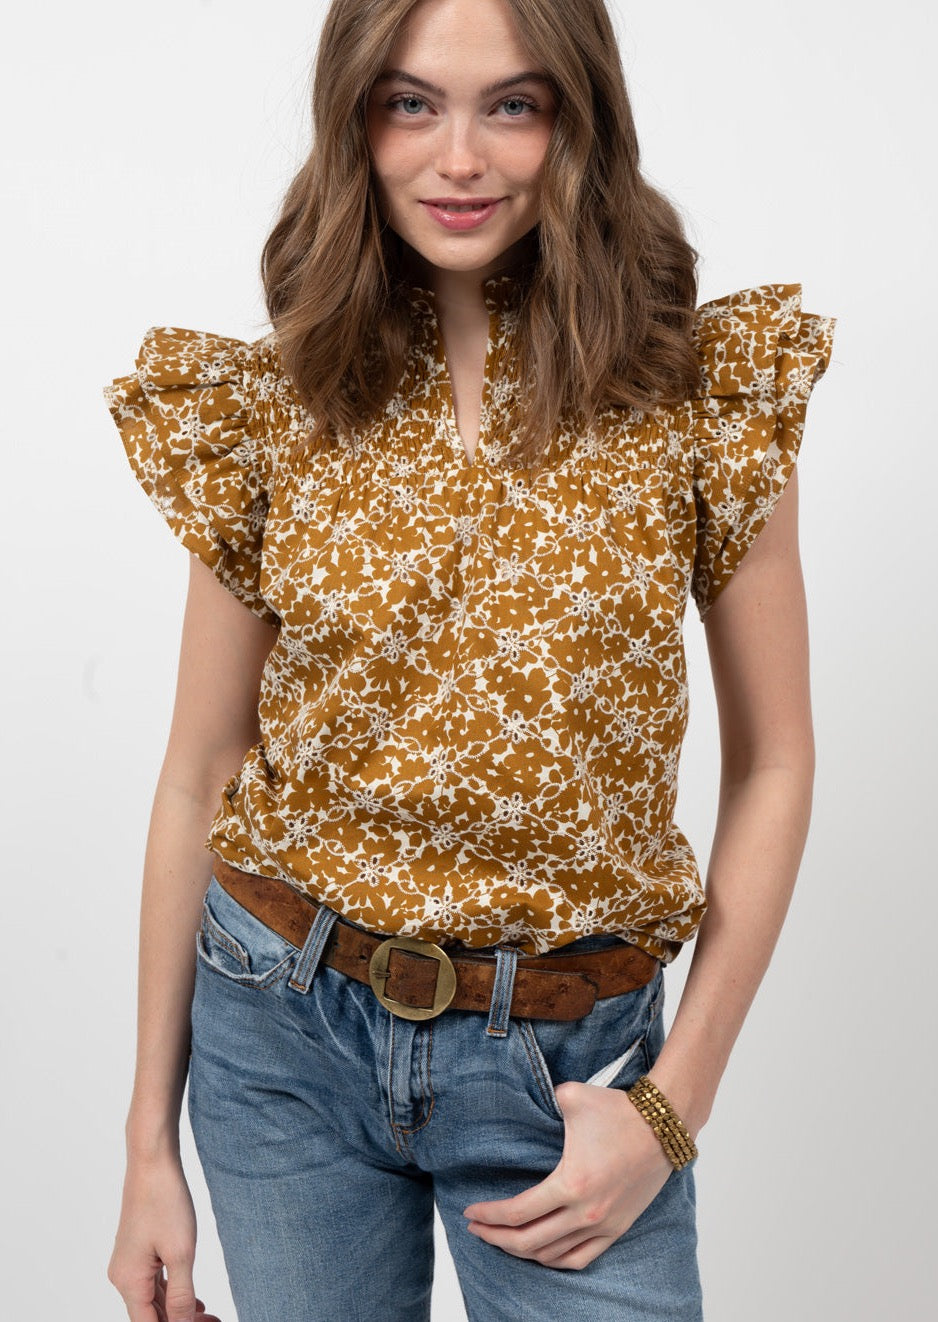 burnt gold flora eyeletl top with split neckline and ruffle sleeves